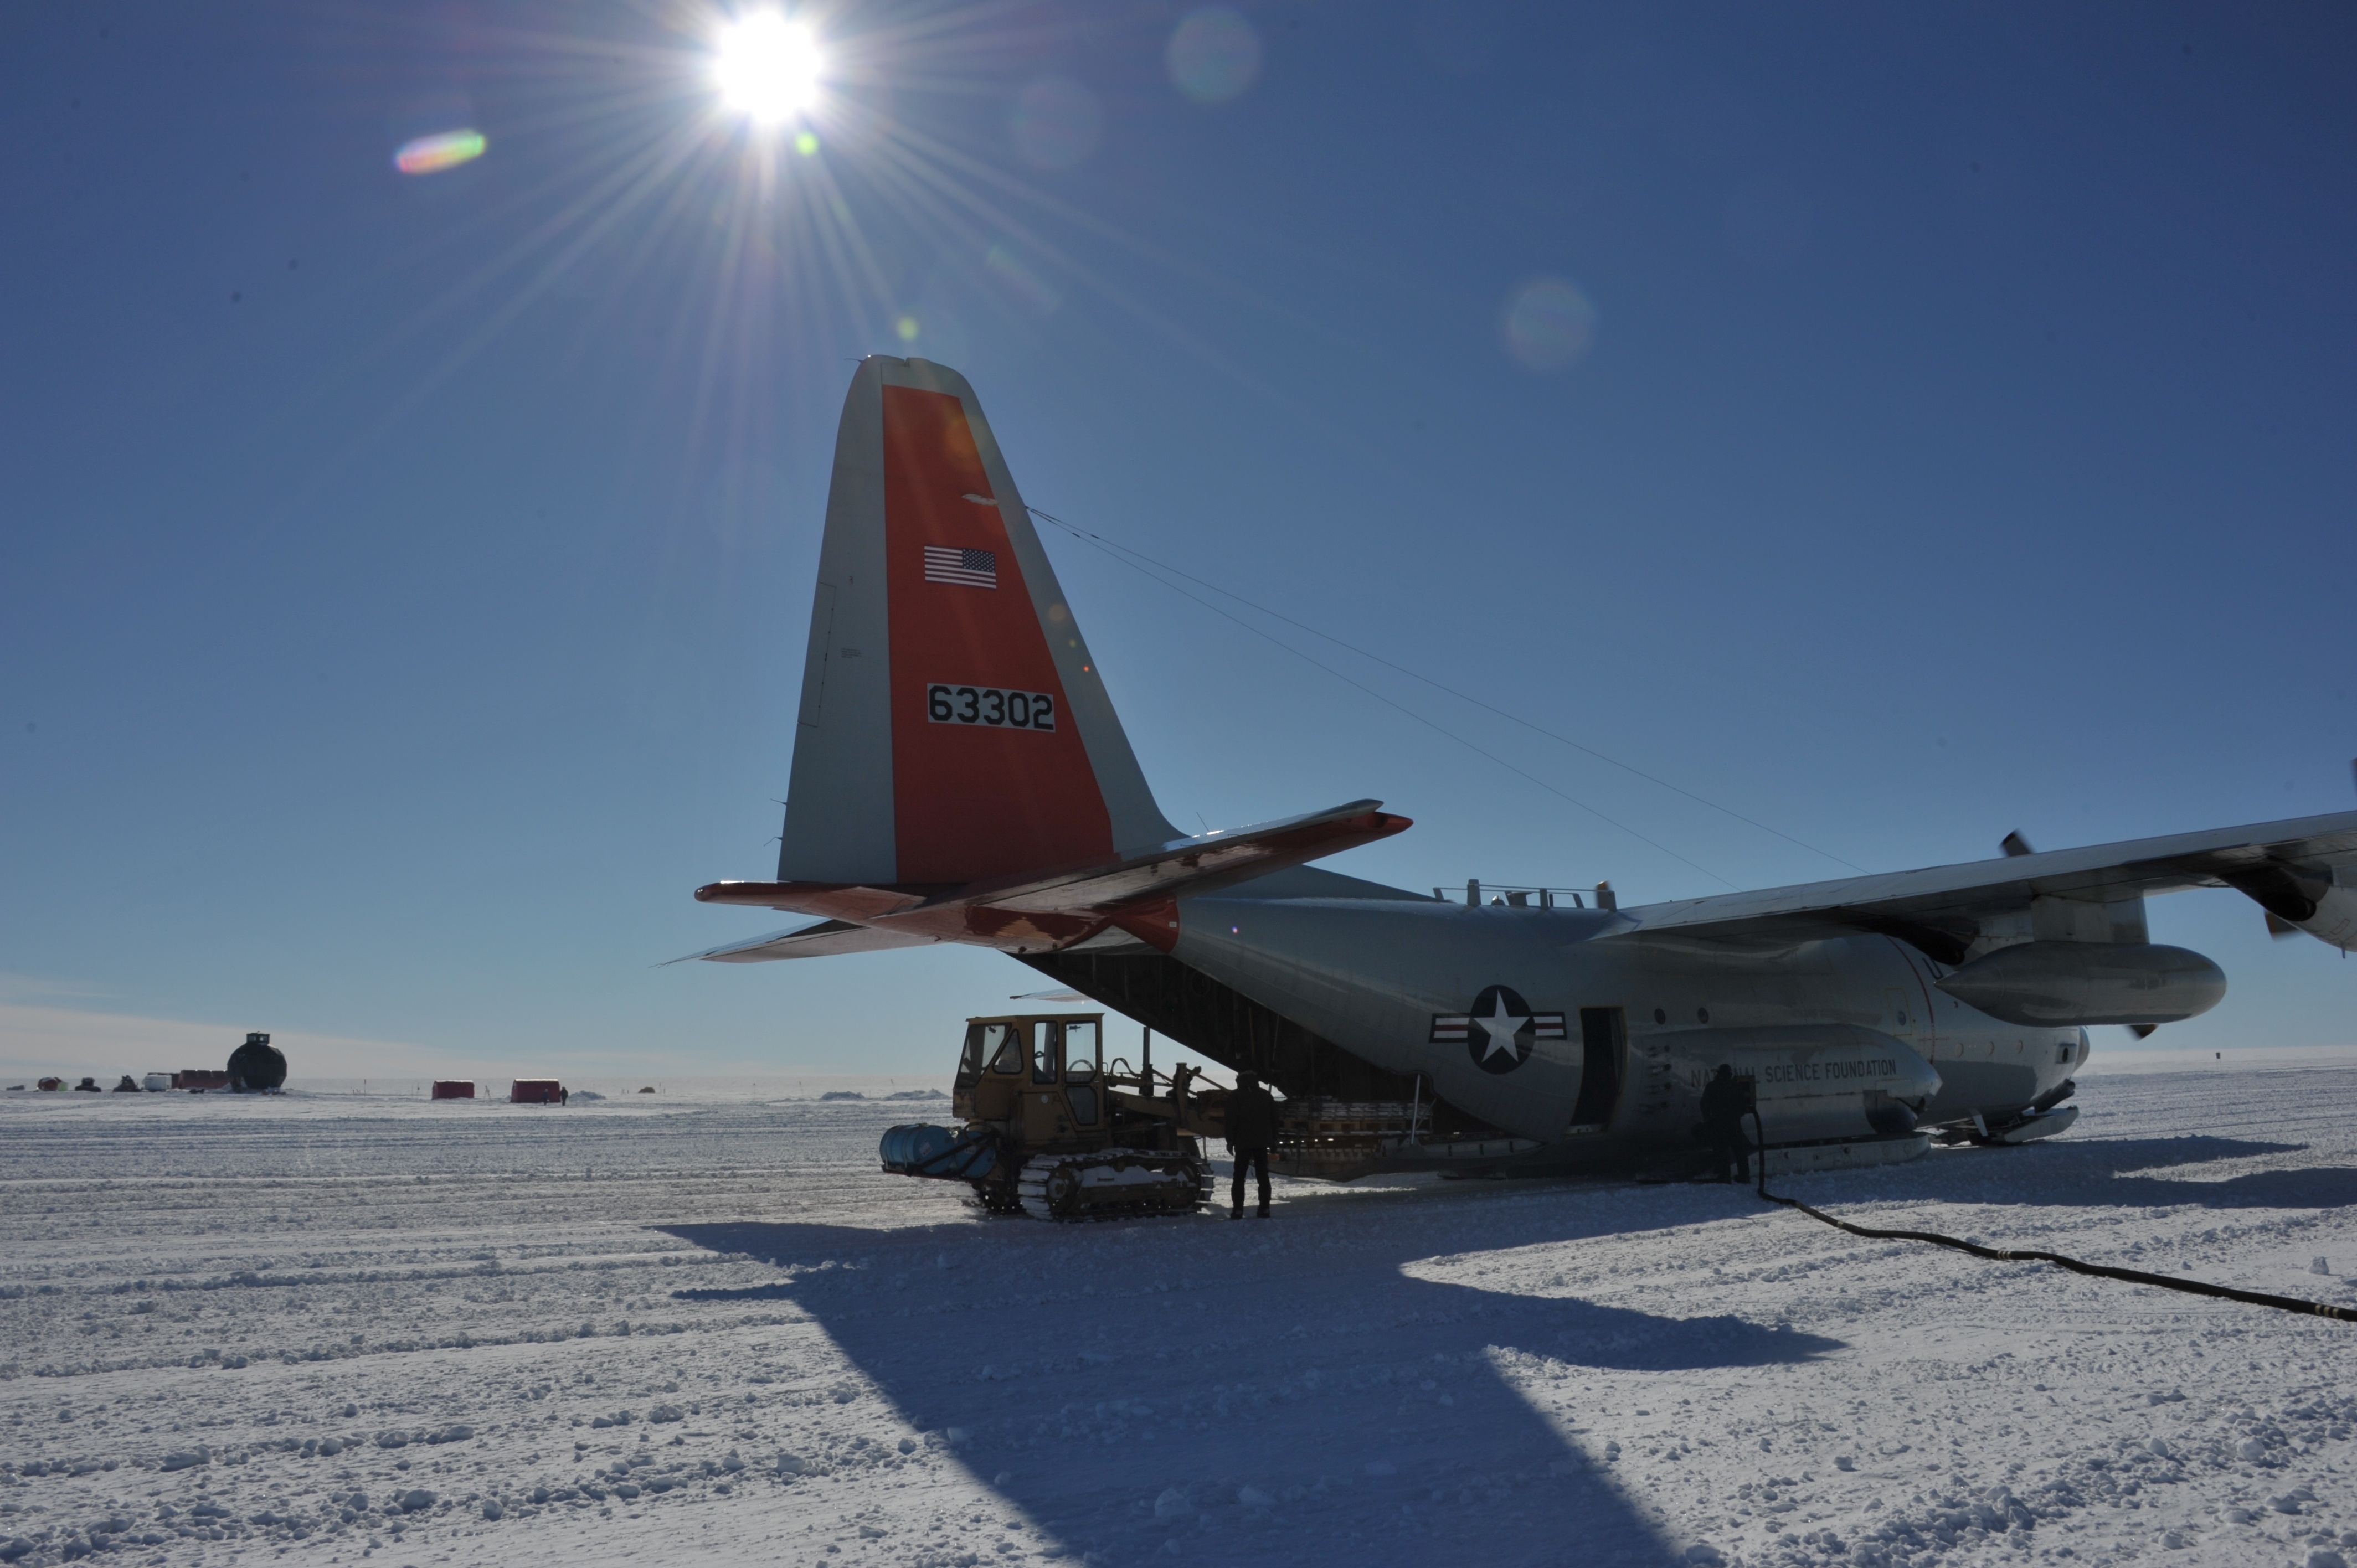 The Caterpillar is loading the LC-130 with cargo to be sent back to Kangerlussuaq.